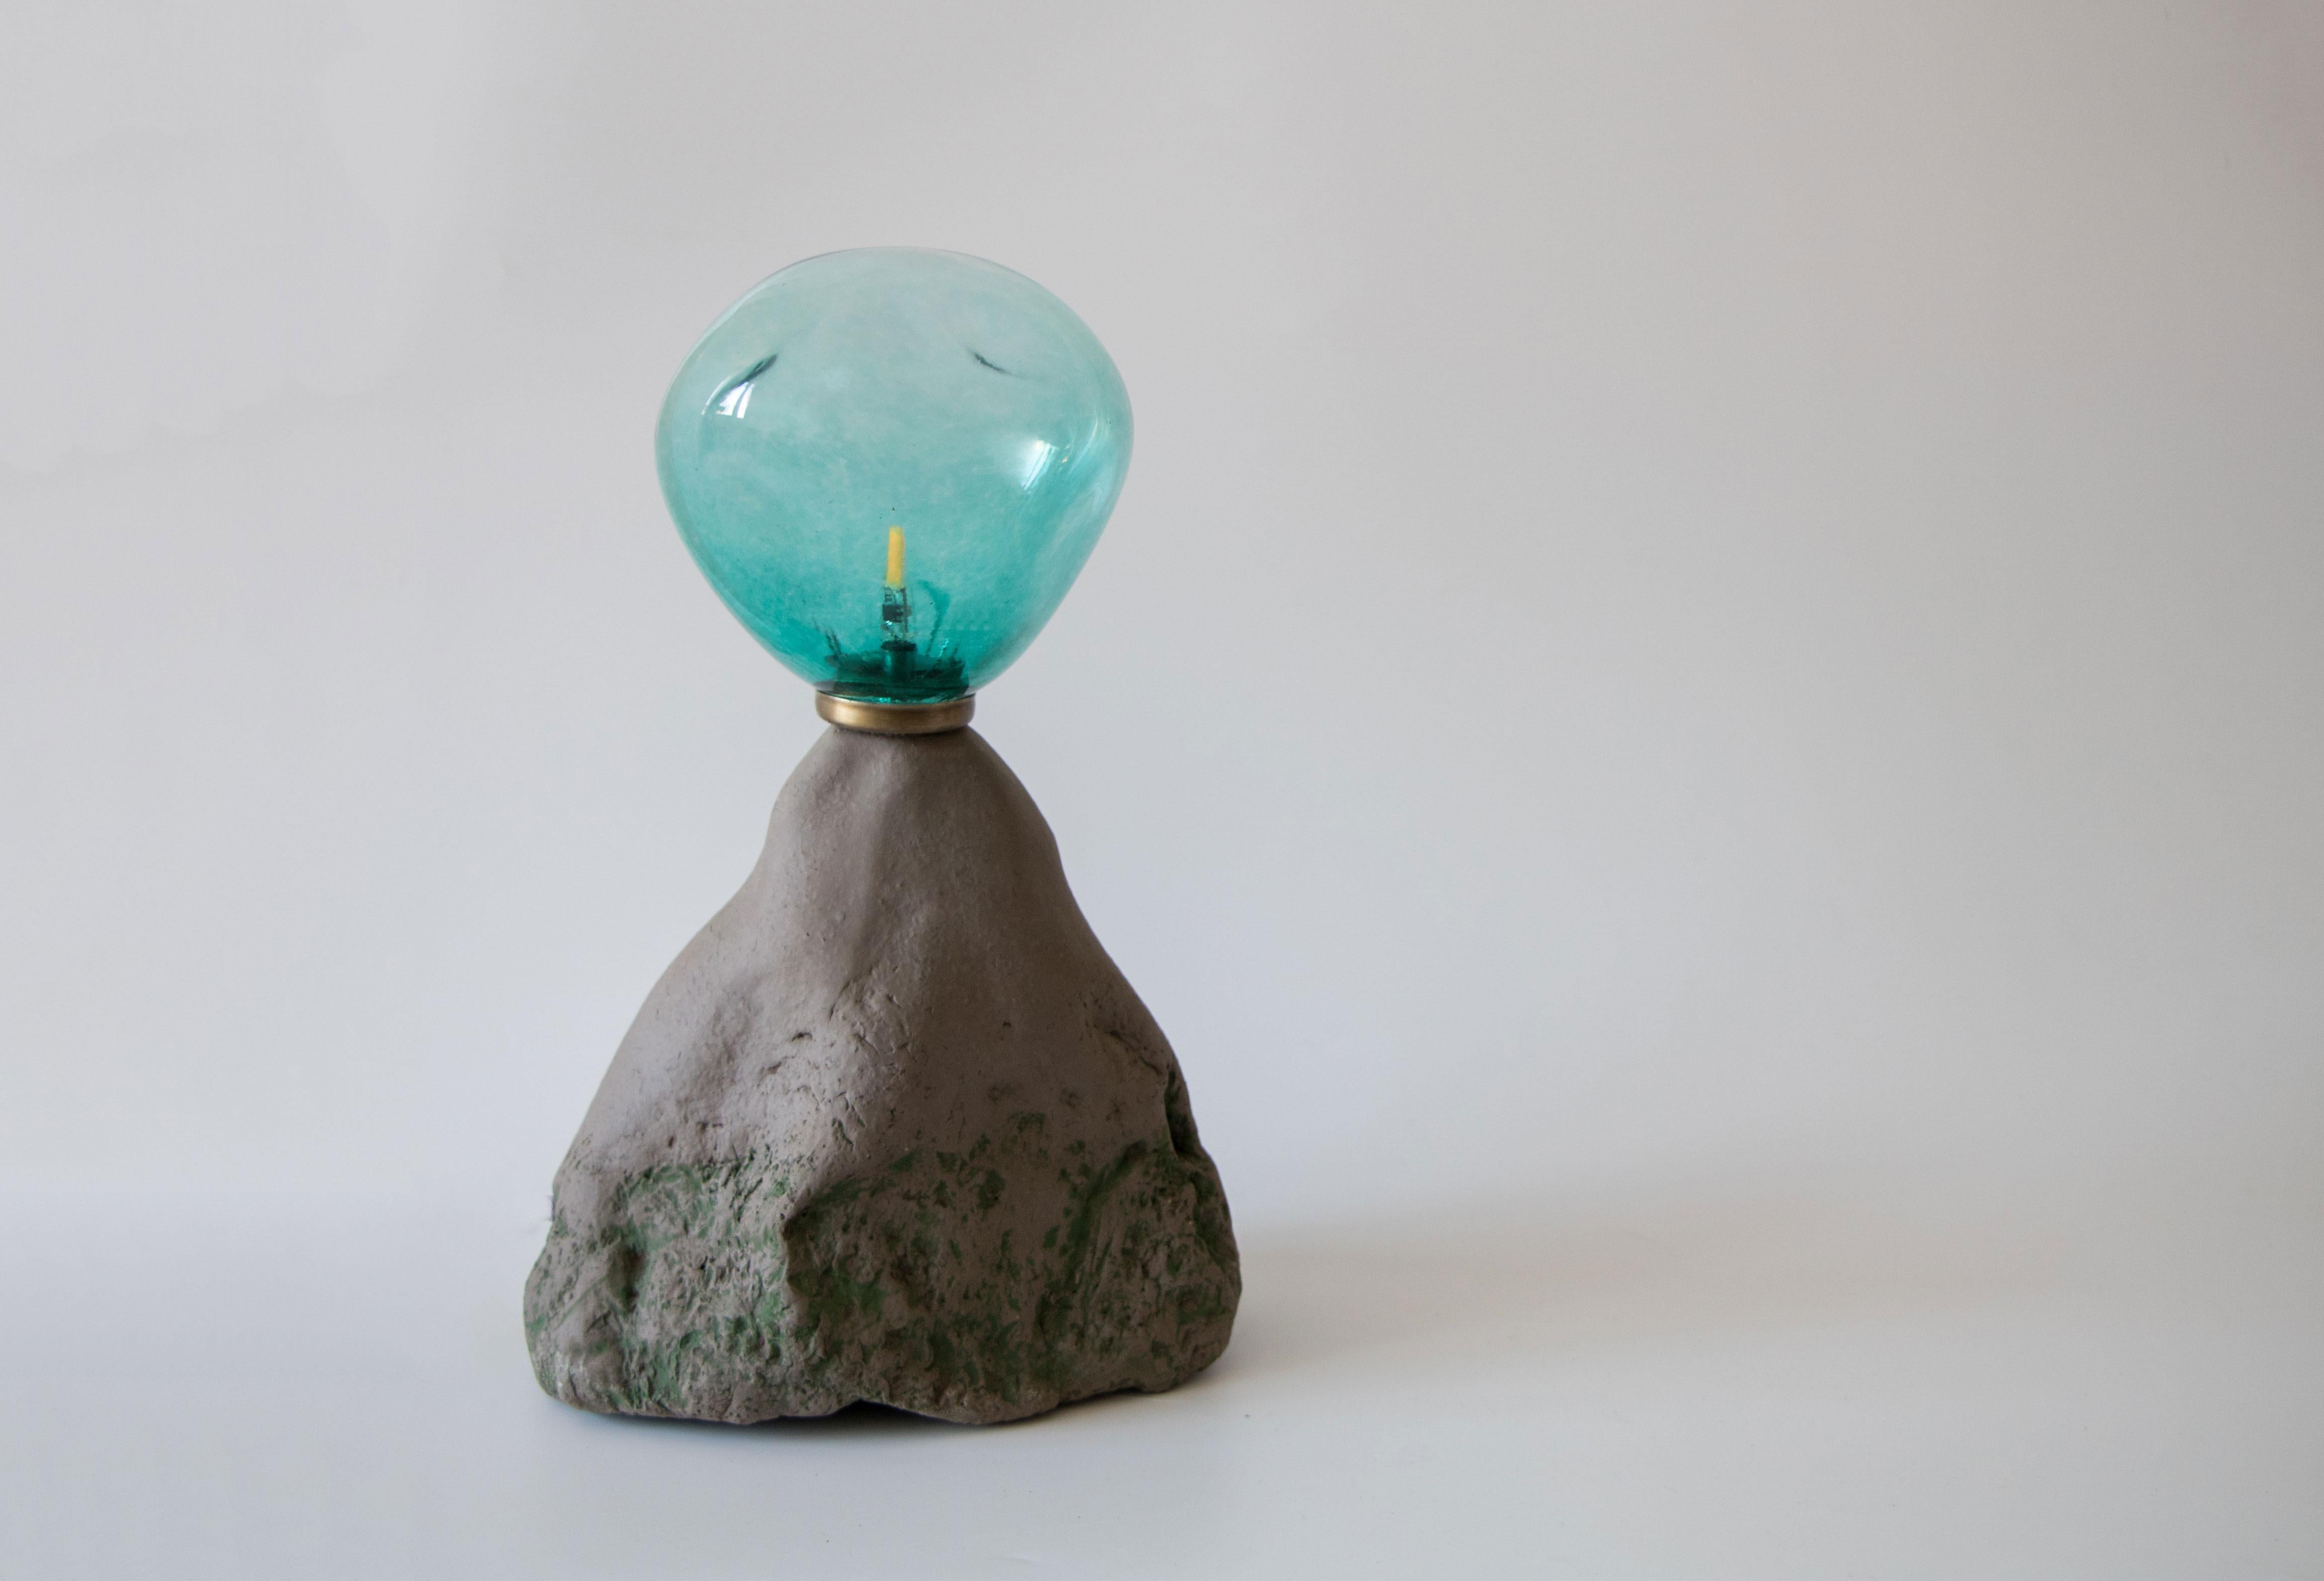 Abyss No 7 table lamp by Ceren Gurkan
Dimensions: D15 x W20 x H28 cm
Materials: Stoneware, handblown glass.

All our lamps can be wired according to each country. If sold to the USA it will be wired for the USA for instance.

Ceren Gurkan is